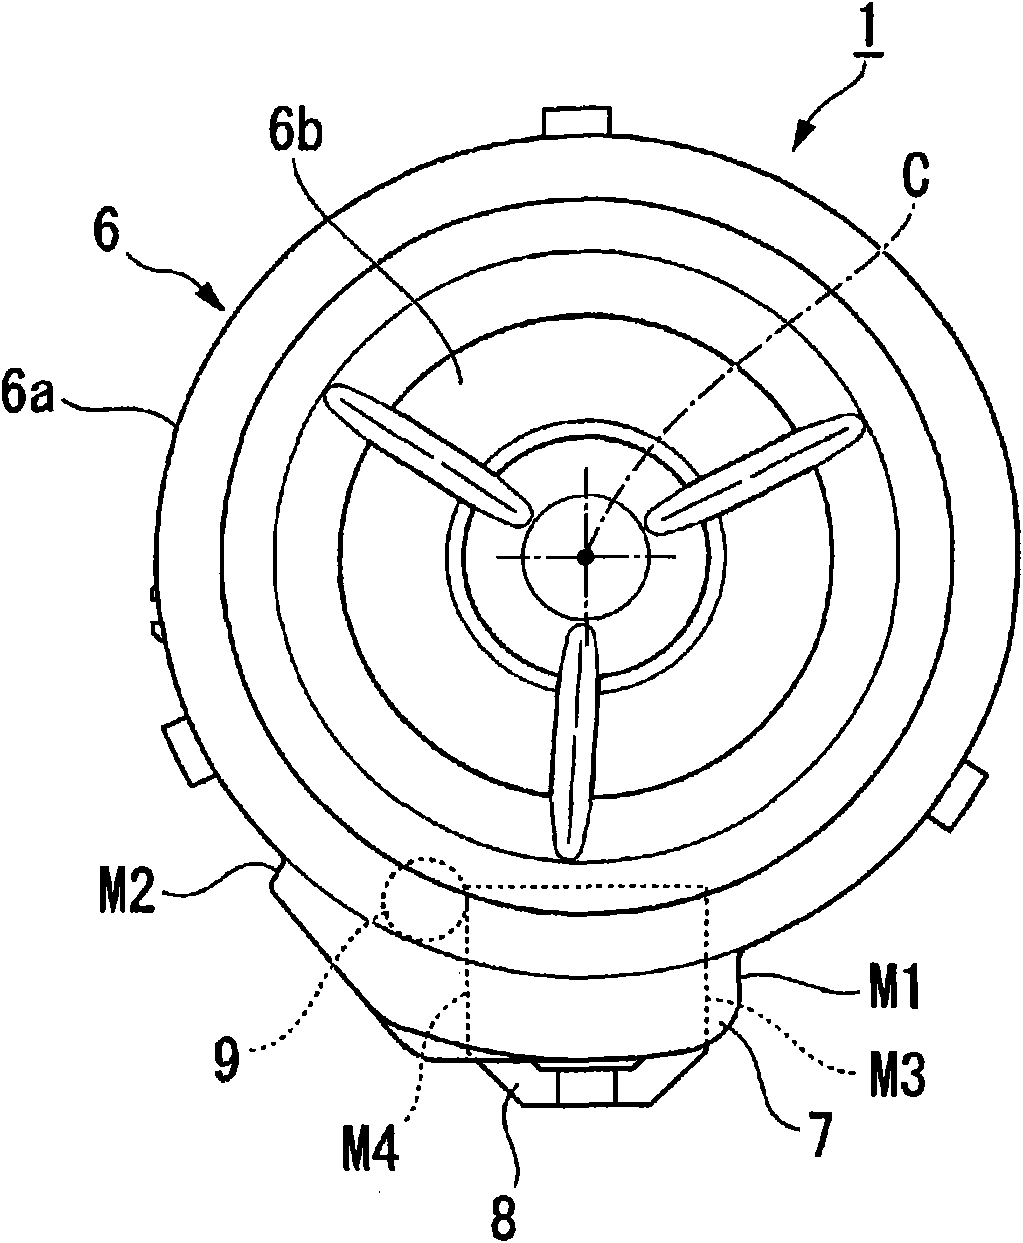 Loudspeaker mounting structure